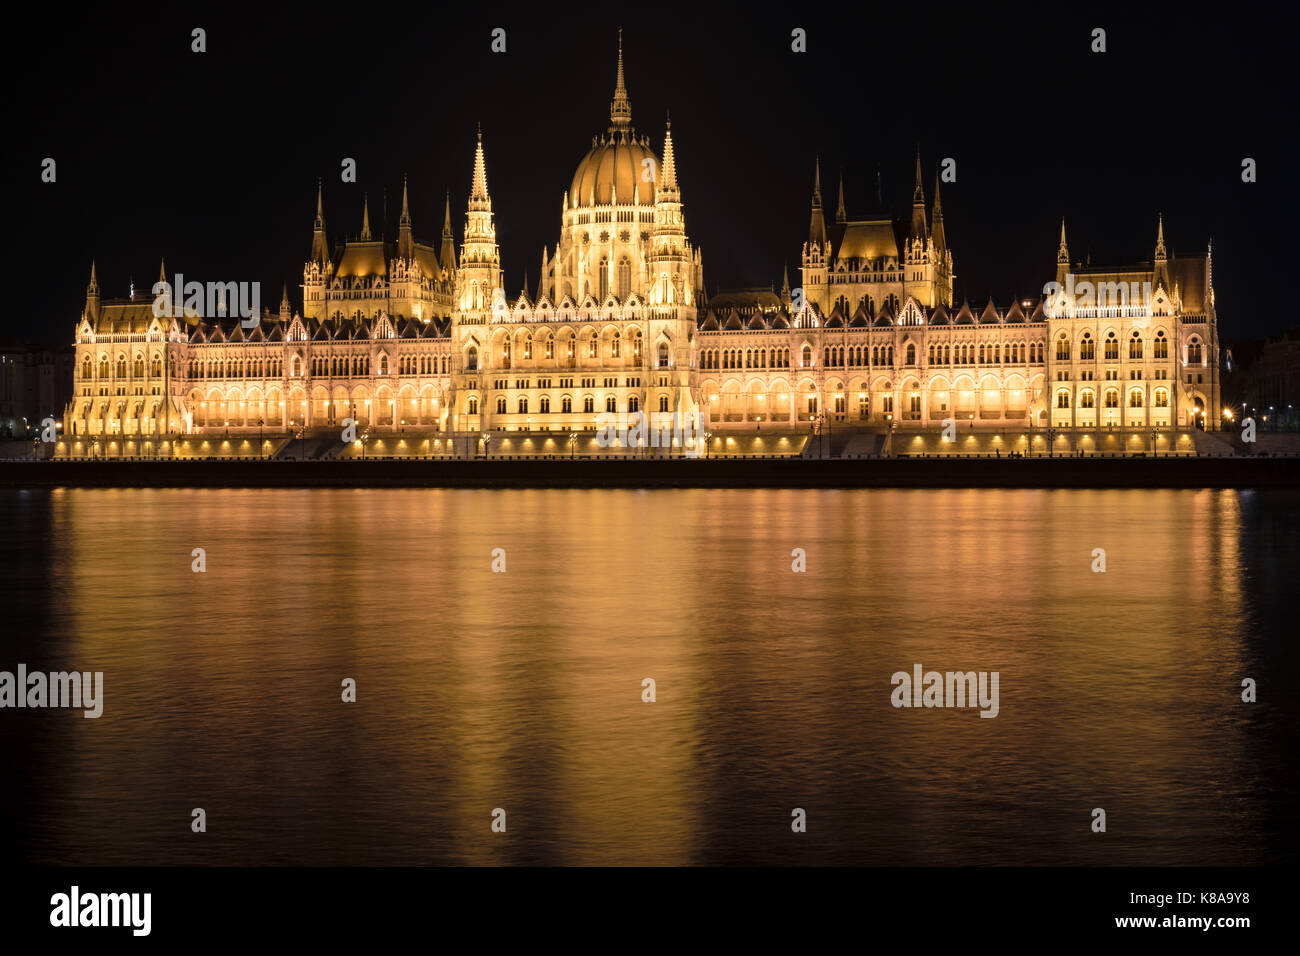 Night shot of the Hungarian Parliament Building with beautiful golden reflections in the water of the Danube in Budapest, Hungary. Stock Photo